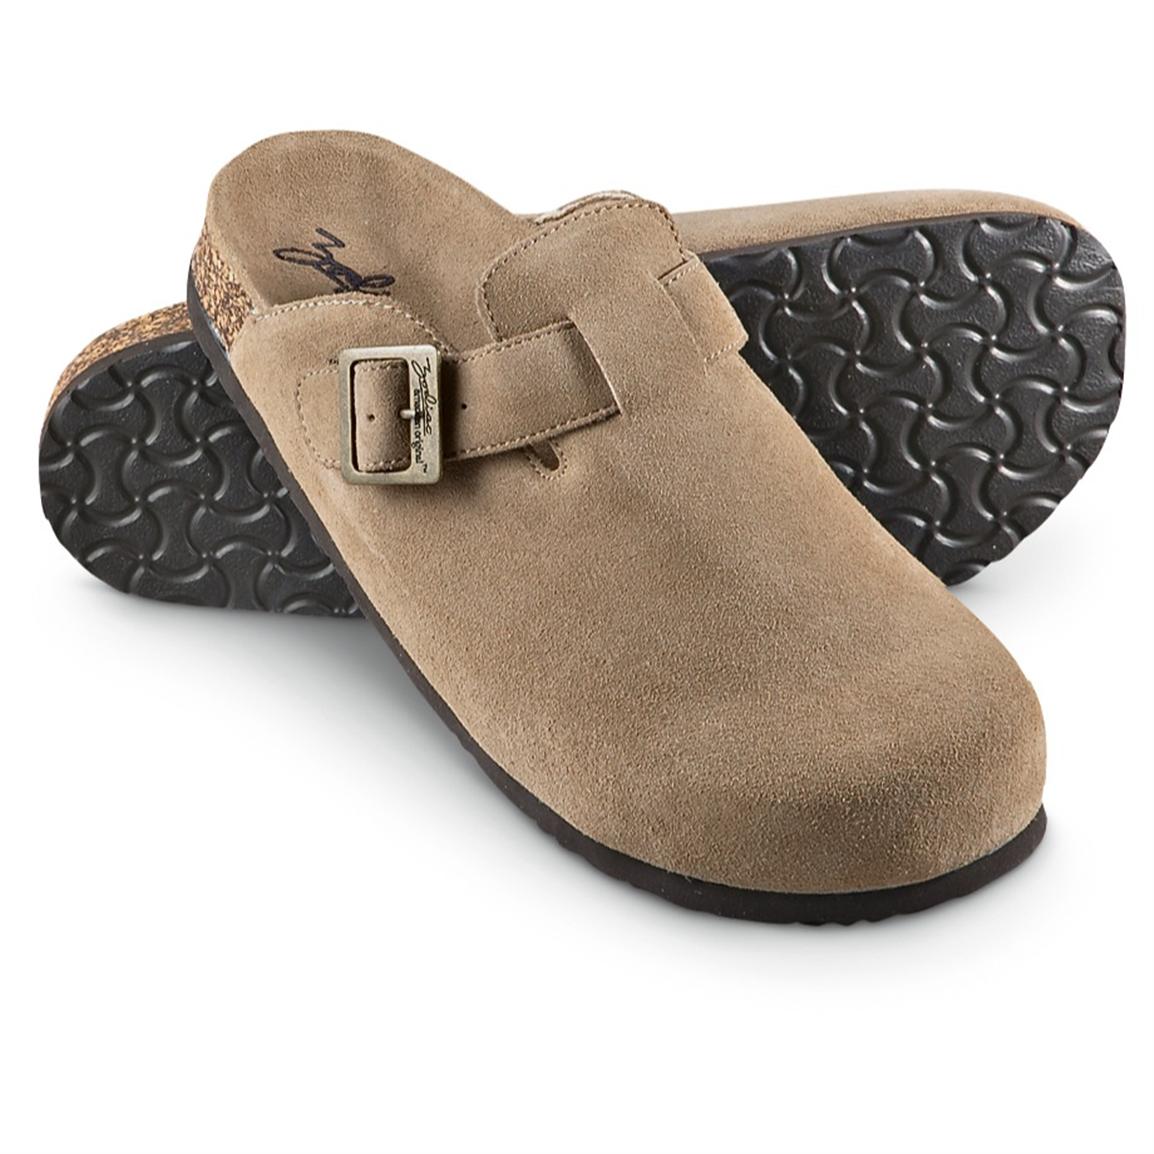 Buy > suede clog shoes > in stock